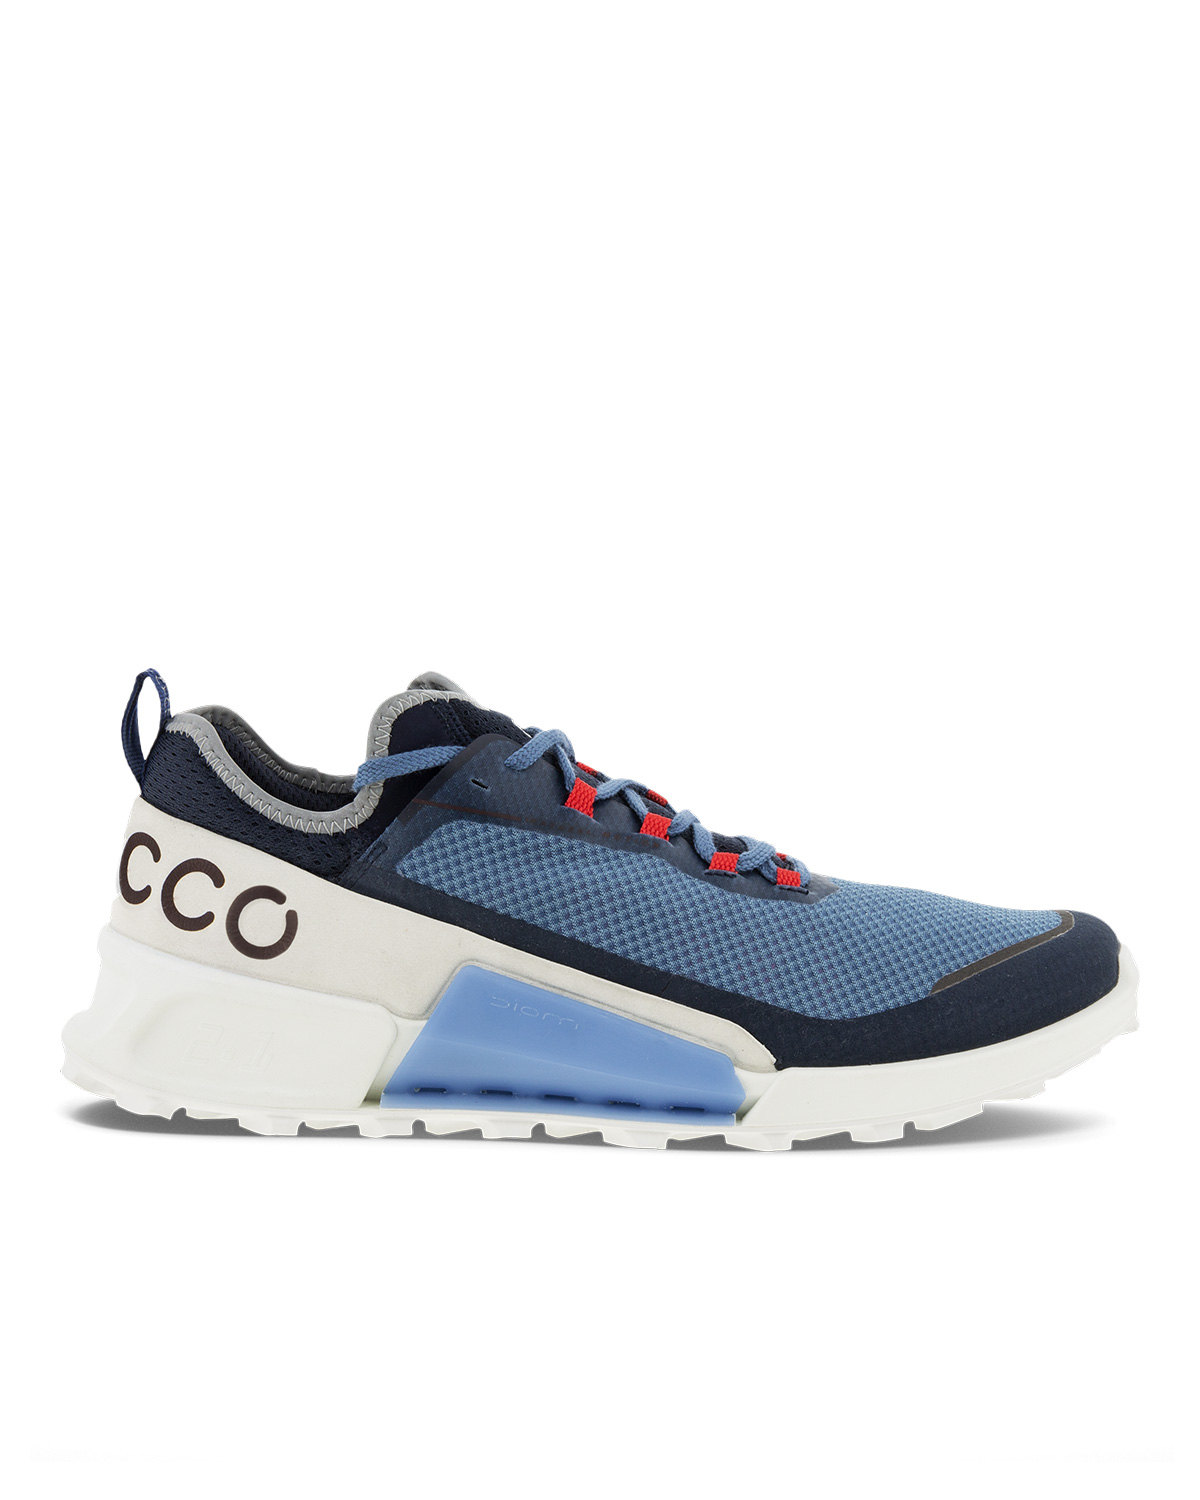 Official ECCO® Online Shop – Quality Footwear & Leather Goods